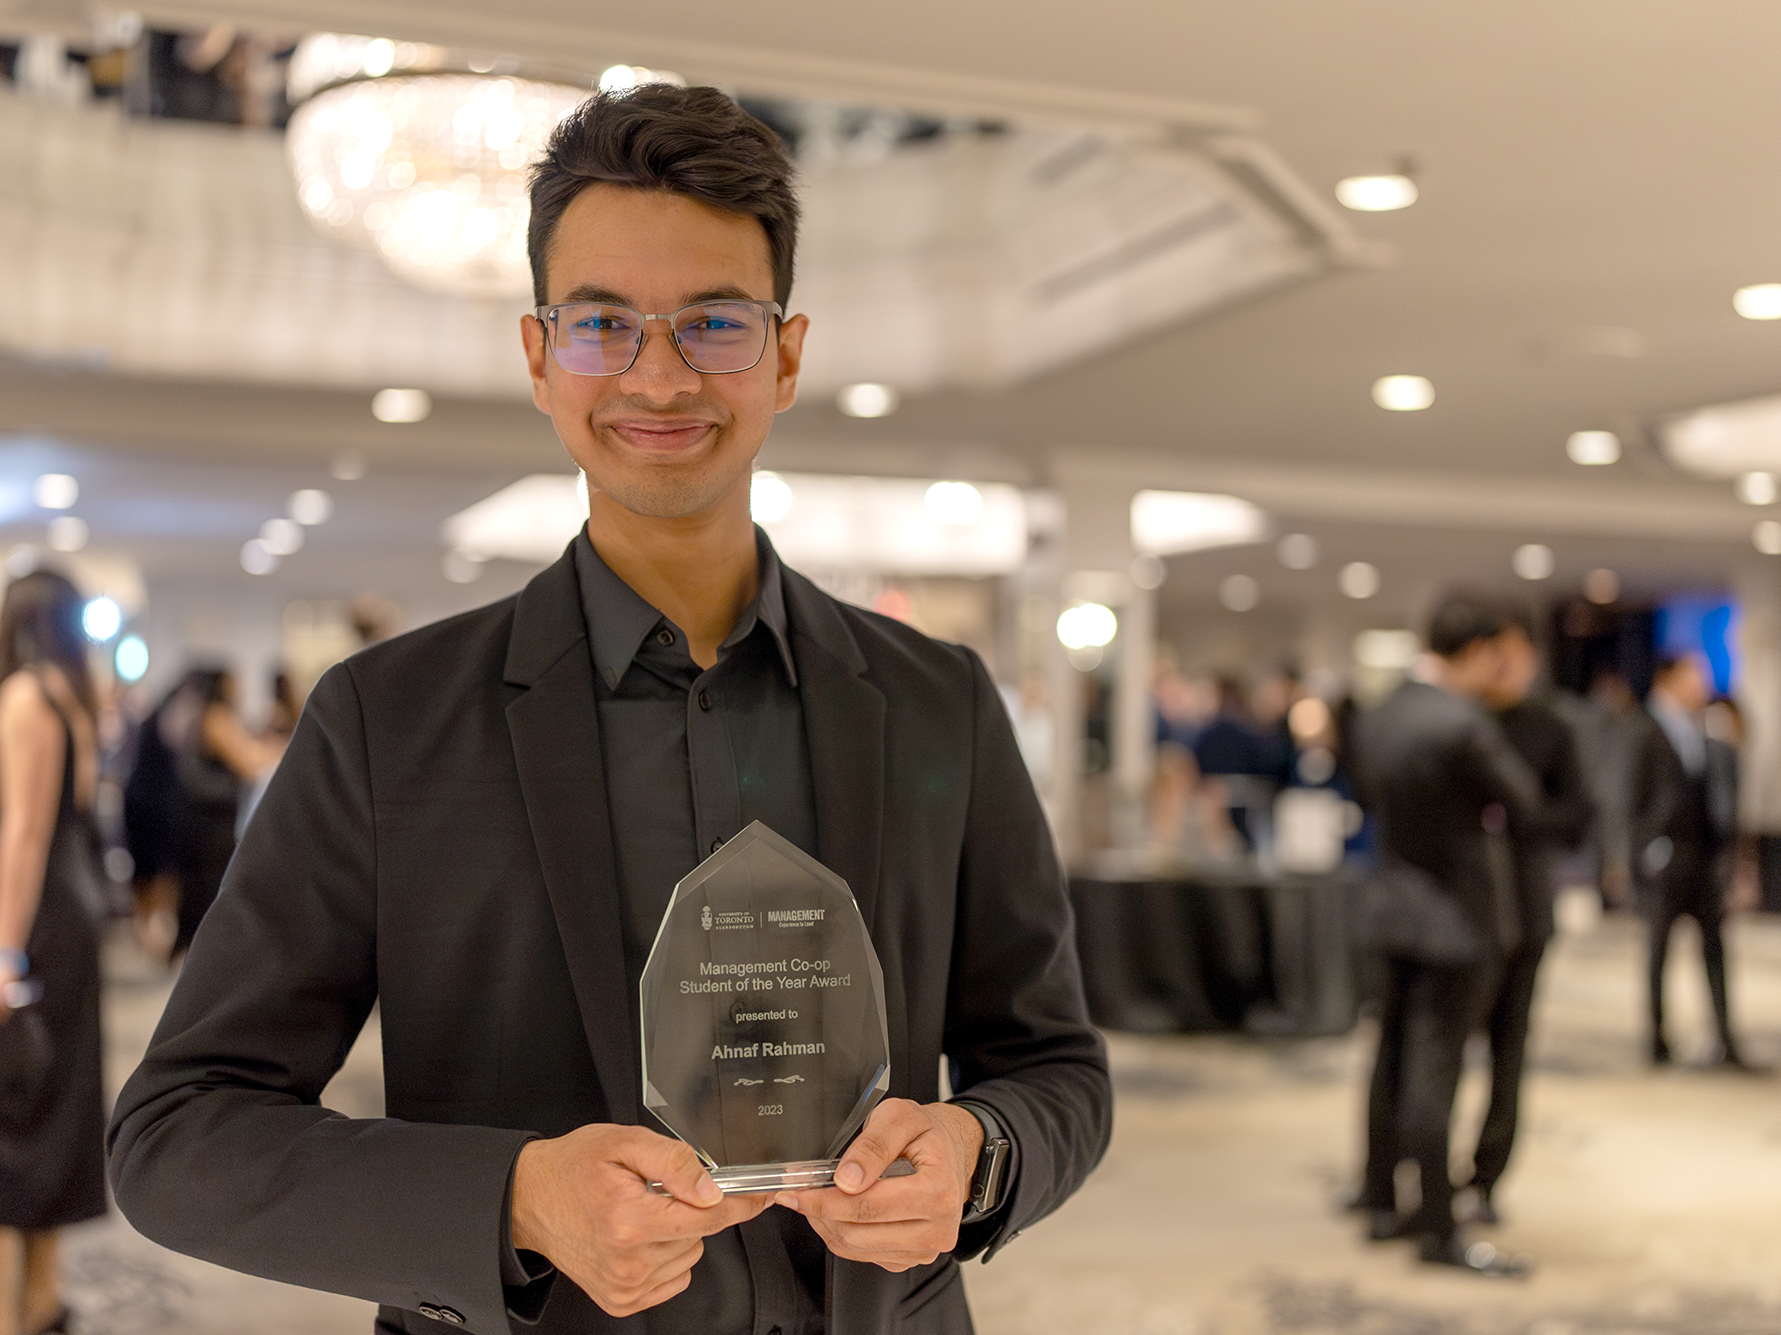 CEWIL Canada Co-op Student of the Year Ahnaf Rahman holds his award and smiles in front of a crystal chandelier while wearing a black suit at the University of Toronto Scarborough Management gala.